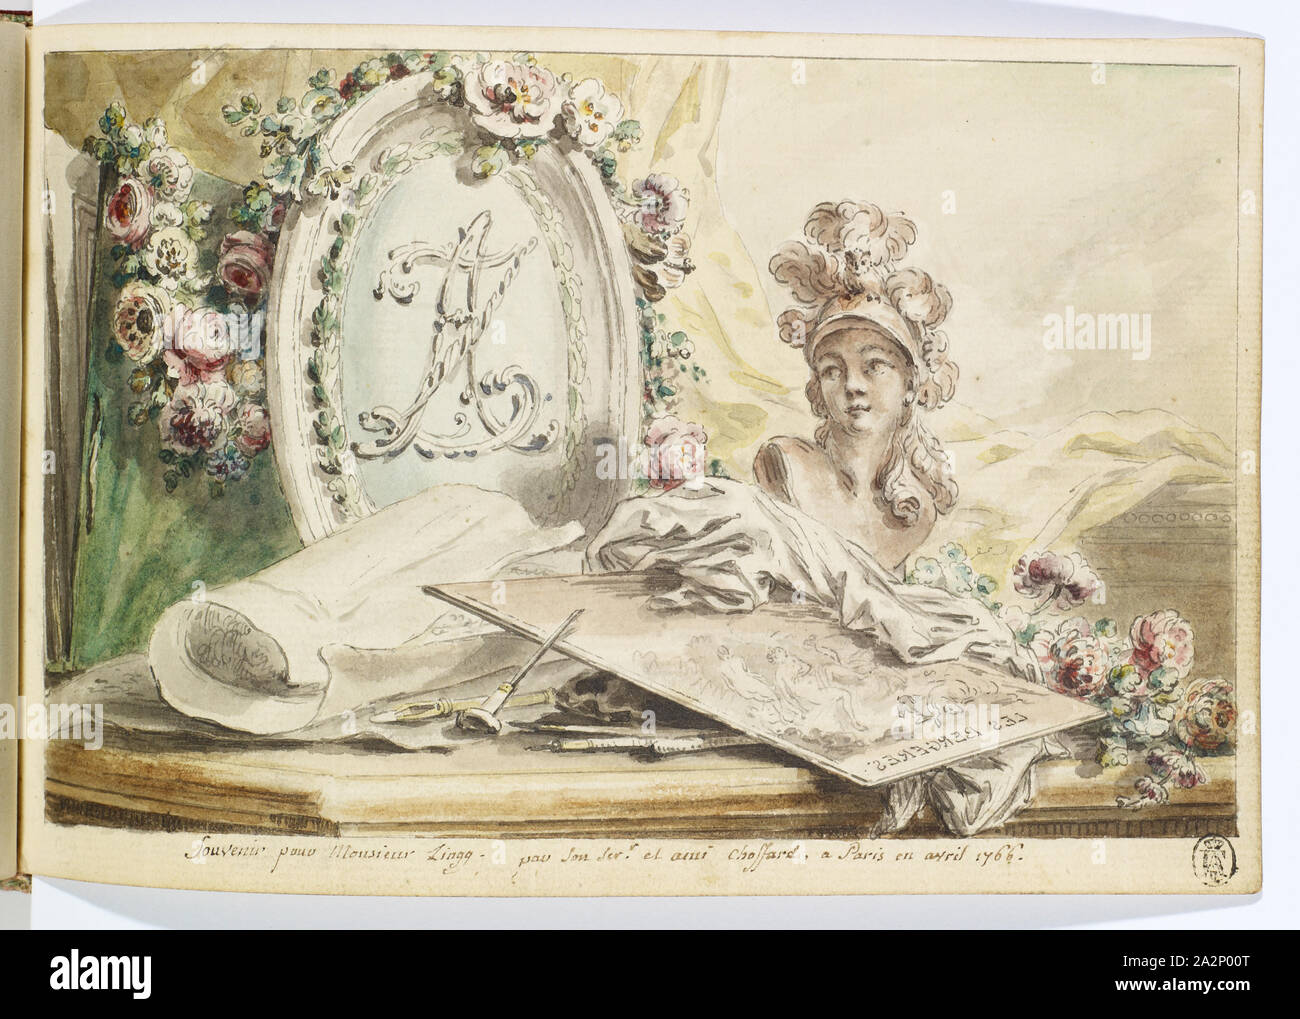 Entry in the genealogy of Adrian Zingg: flower-crowned monogram by Adrian Zingg, in front Minerva bust, worked copper plate and engraving tool, 1766, feather (gray), washed and watercolored, Book: 12.4 x 19.5 x 2.7 cm |, Sheet: 11.9 x 18 cm, Dedicated to feather (brown) below: Souvenir pour Monsieur Zingg., par son Serv.r et ami Choffard., a Paris in avril 1766, Pierre-Philippe Choffard, Paris 1730–1809 Paris Stock Photo